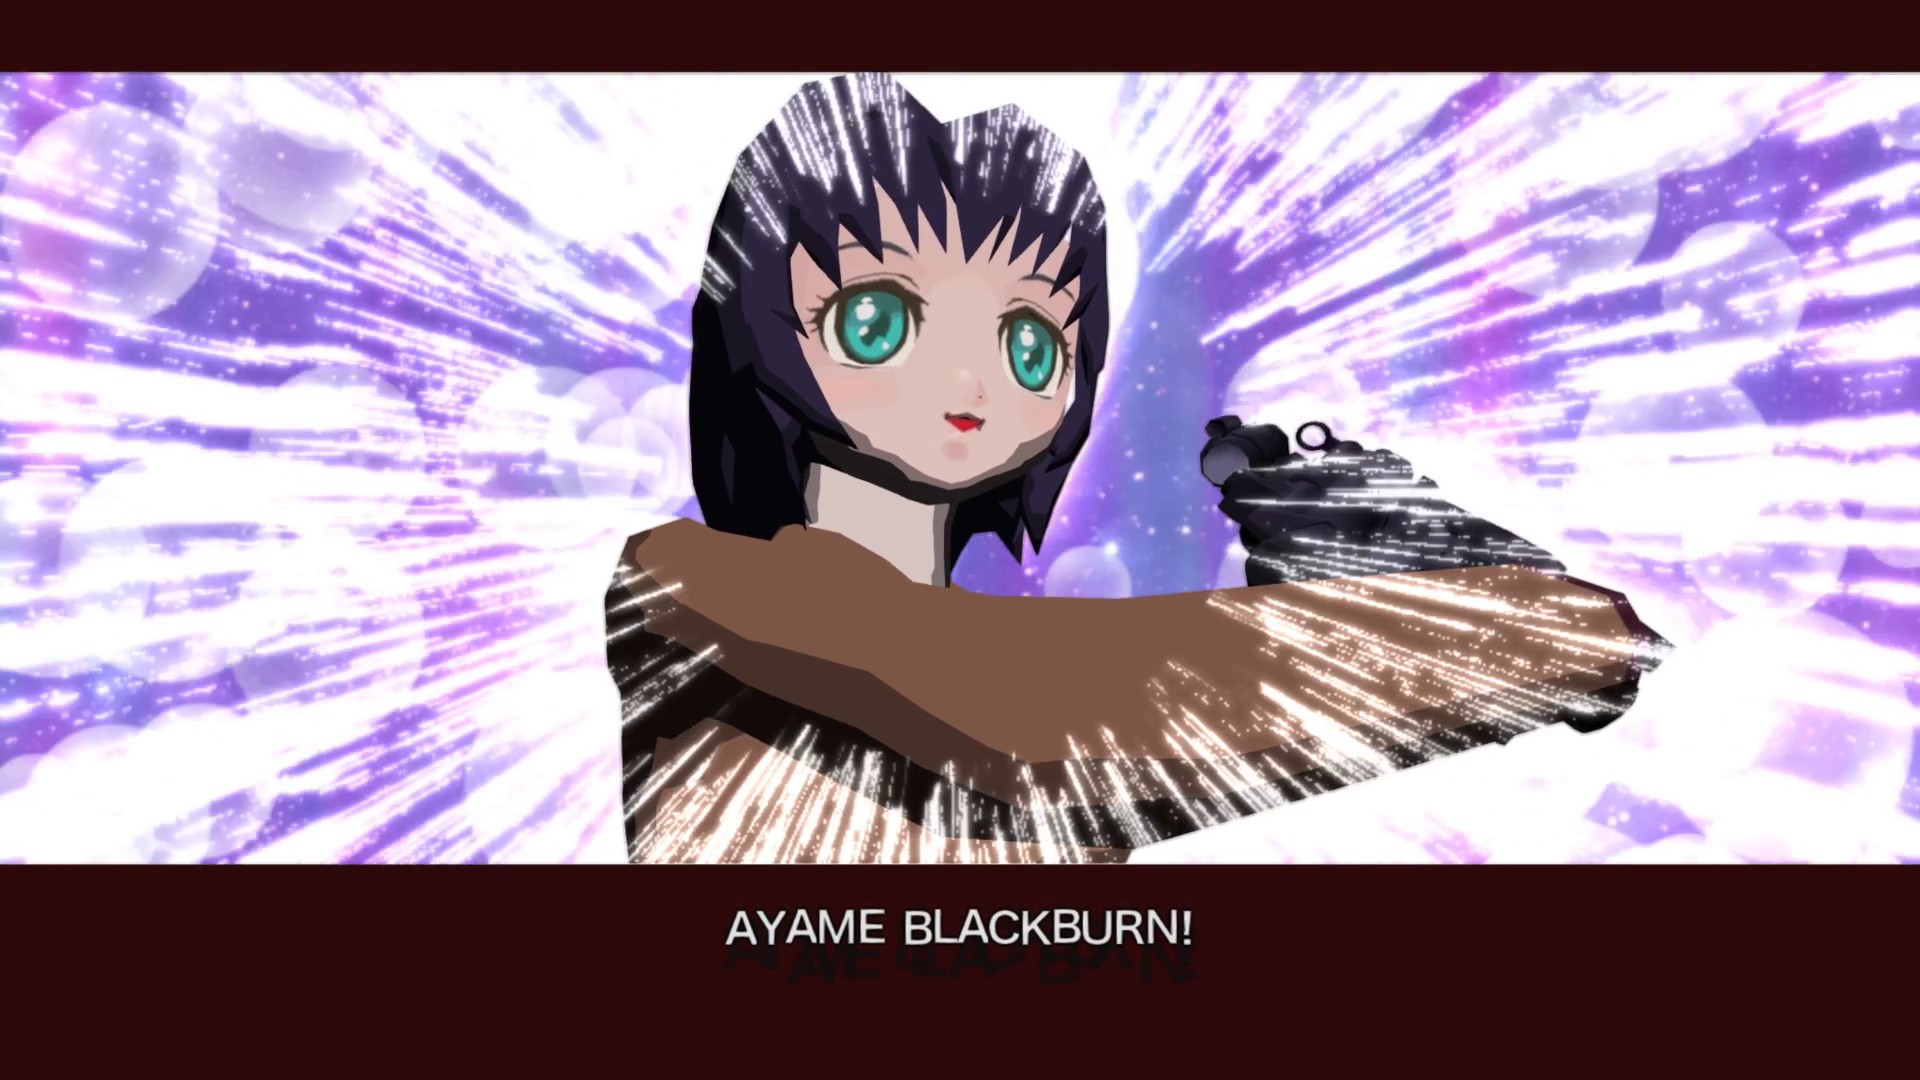 Screenshot of "Encounter." Ayame Blackburn, wearing an anime girl face mask, shouts her name surrounded by emphasis lines and bubbles like in an anime.